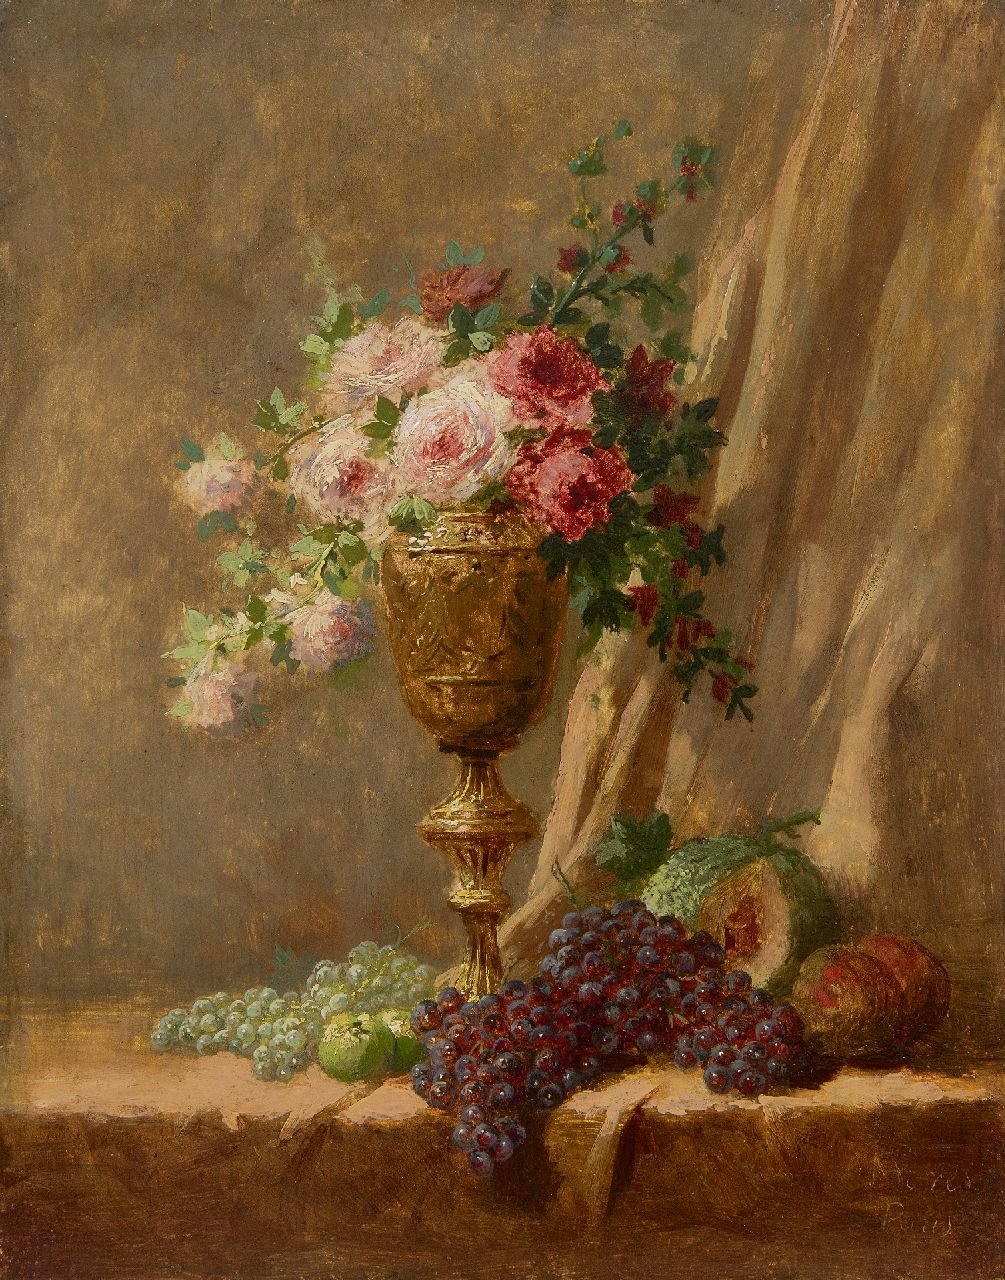 Hollandse Romantische School   | Hollandse Romantische School | Paintings offered for sale | Stilll life with roses in a copper goblet and fruit, oil on panel 27.0 x 21.3 cm